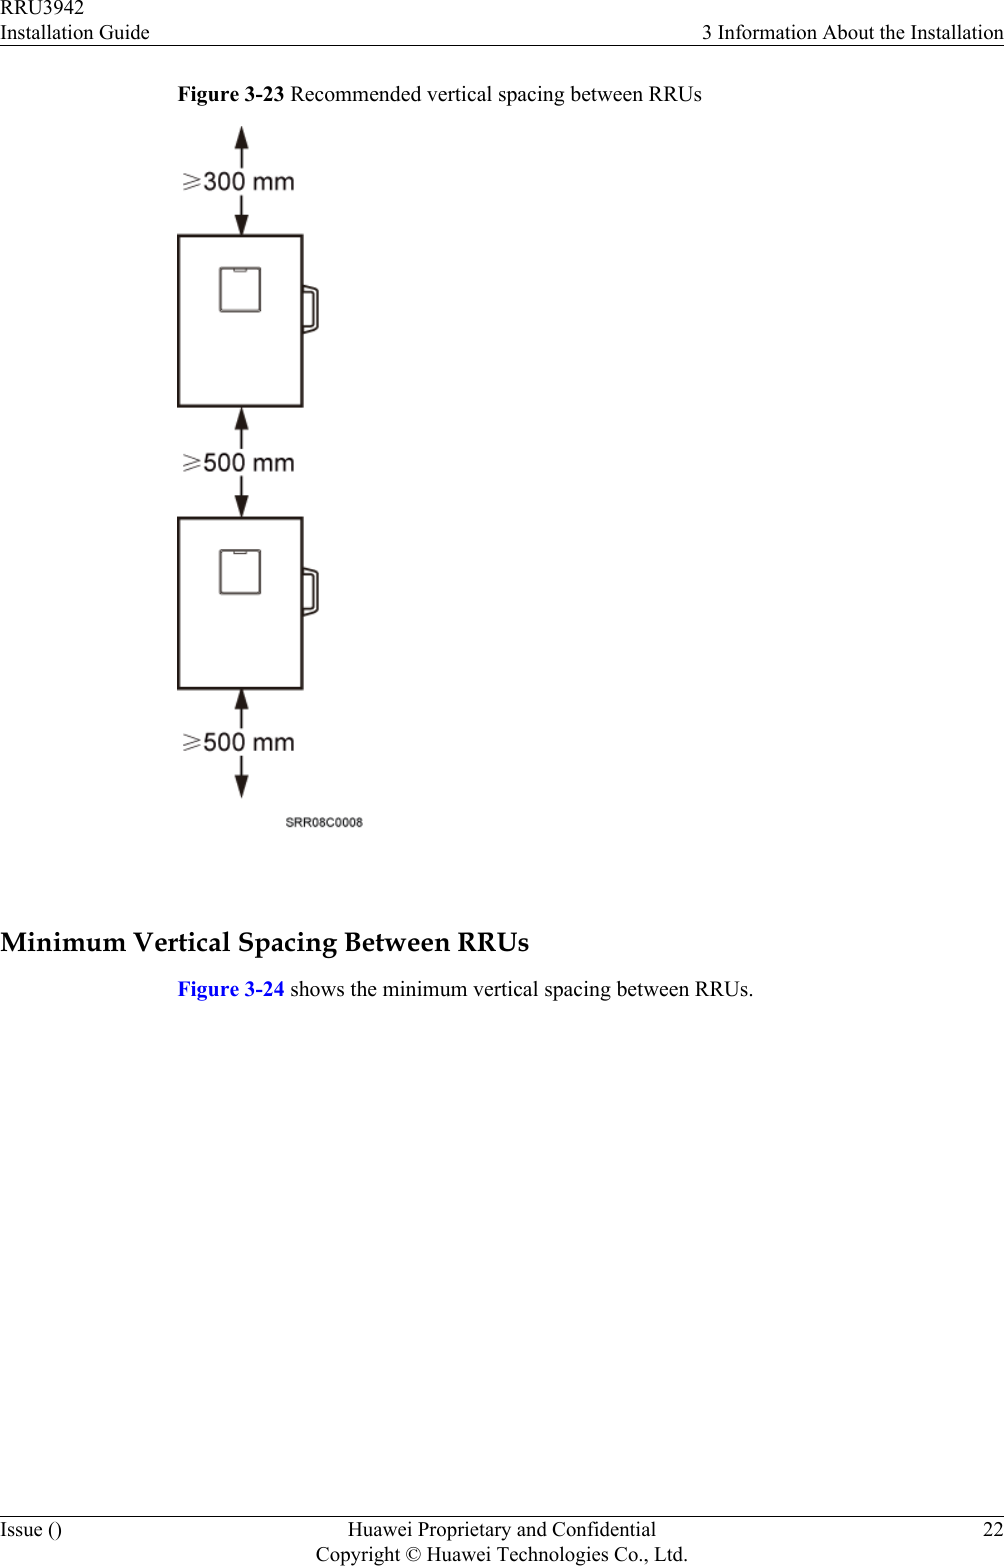 Figure 3-23 Recommended vertical spacing between RRUs Minimum Vertical Spacing Between RRUsFigure 3-24 shows the minimum vertical spacing between RRUs.RRU3942Installation Guide 3 Information About the InstallationIssue () Huawei Proprietary and ConfidentialCopyright © Huawei Technologies Co., Ltd.22